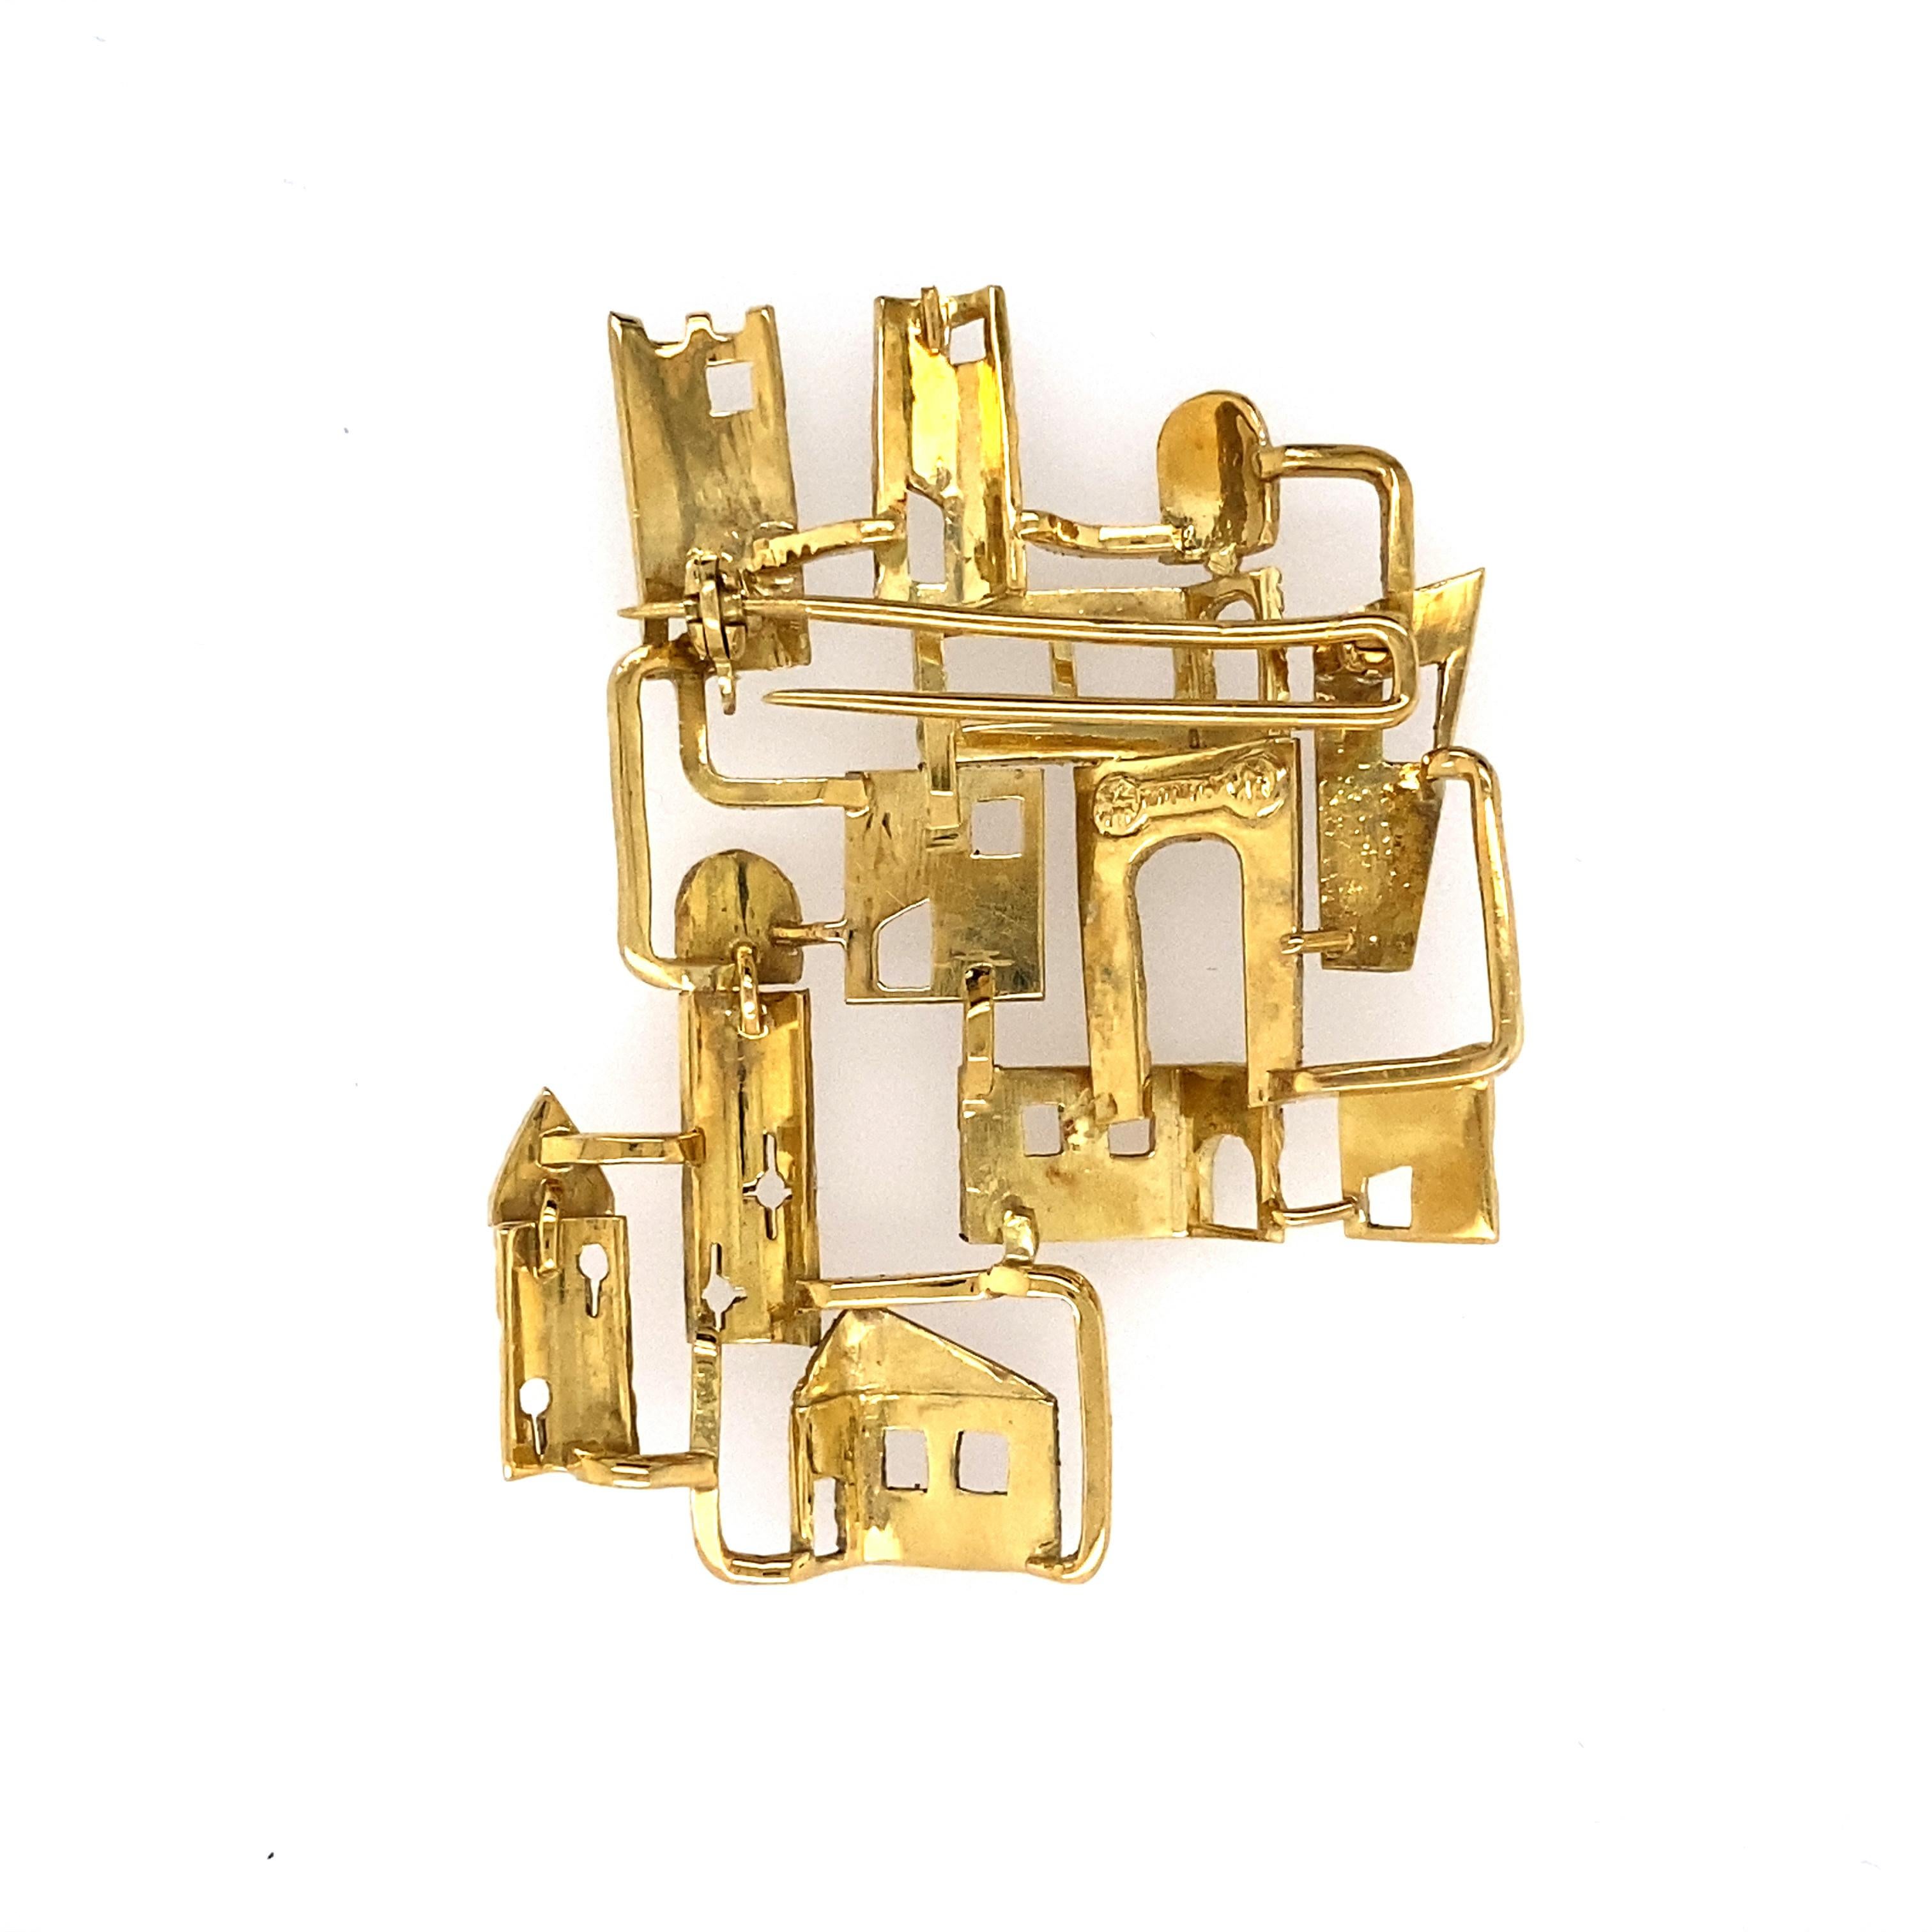 18k gold village Brooch, signed Zolotas, approximately  10.4 dwts
Size 2 1/8 x 1 5/8 inches.
